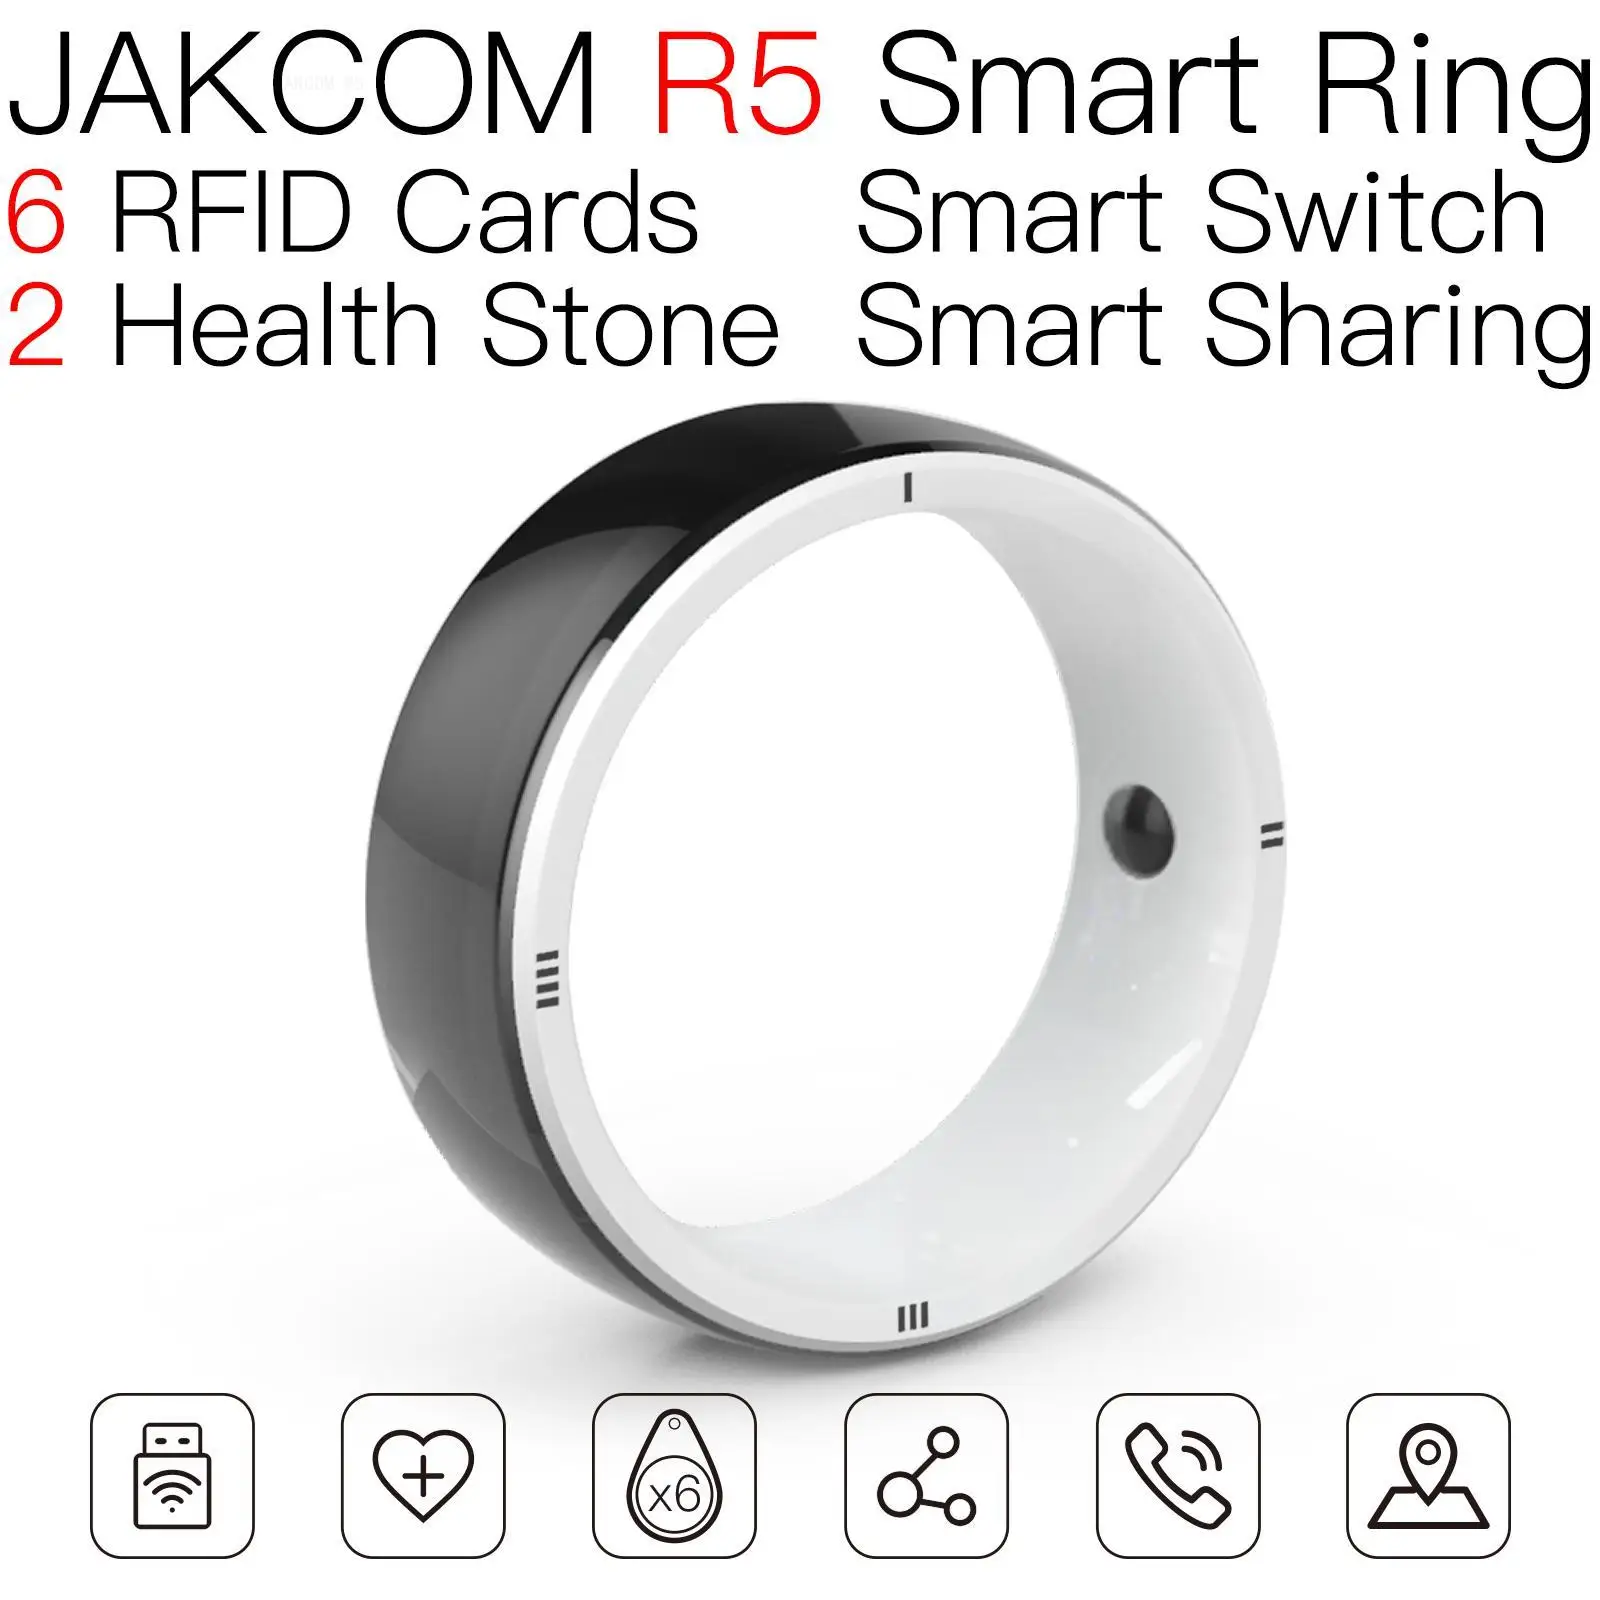 

JAKCOM R5 Smart Ring New product as casino chip sticker rfid uid nfc microchip blank cards with unfused antimetal 10pcs book